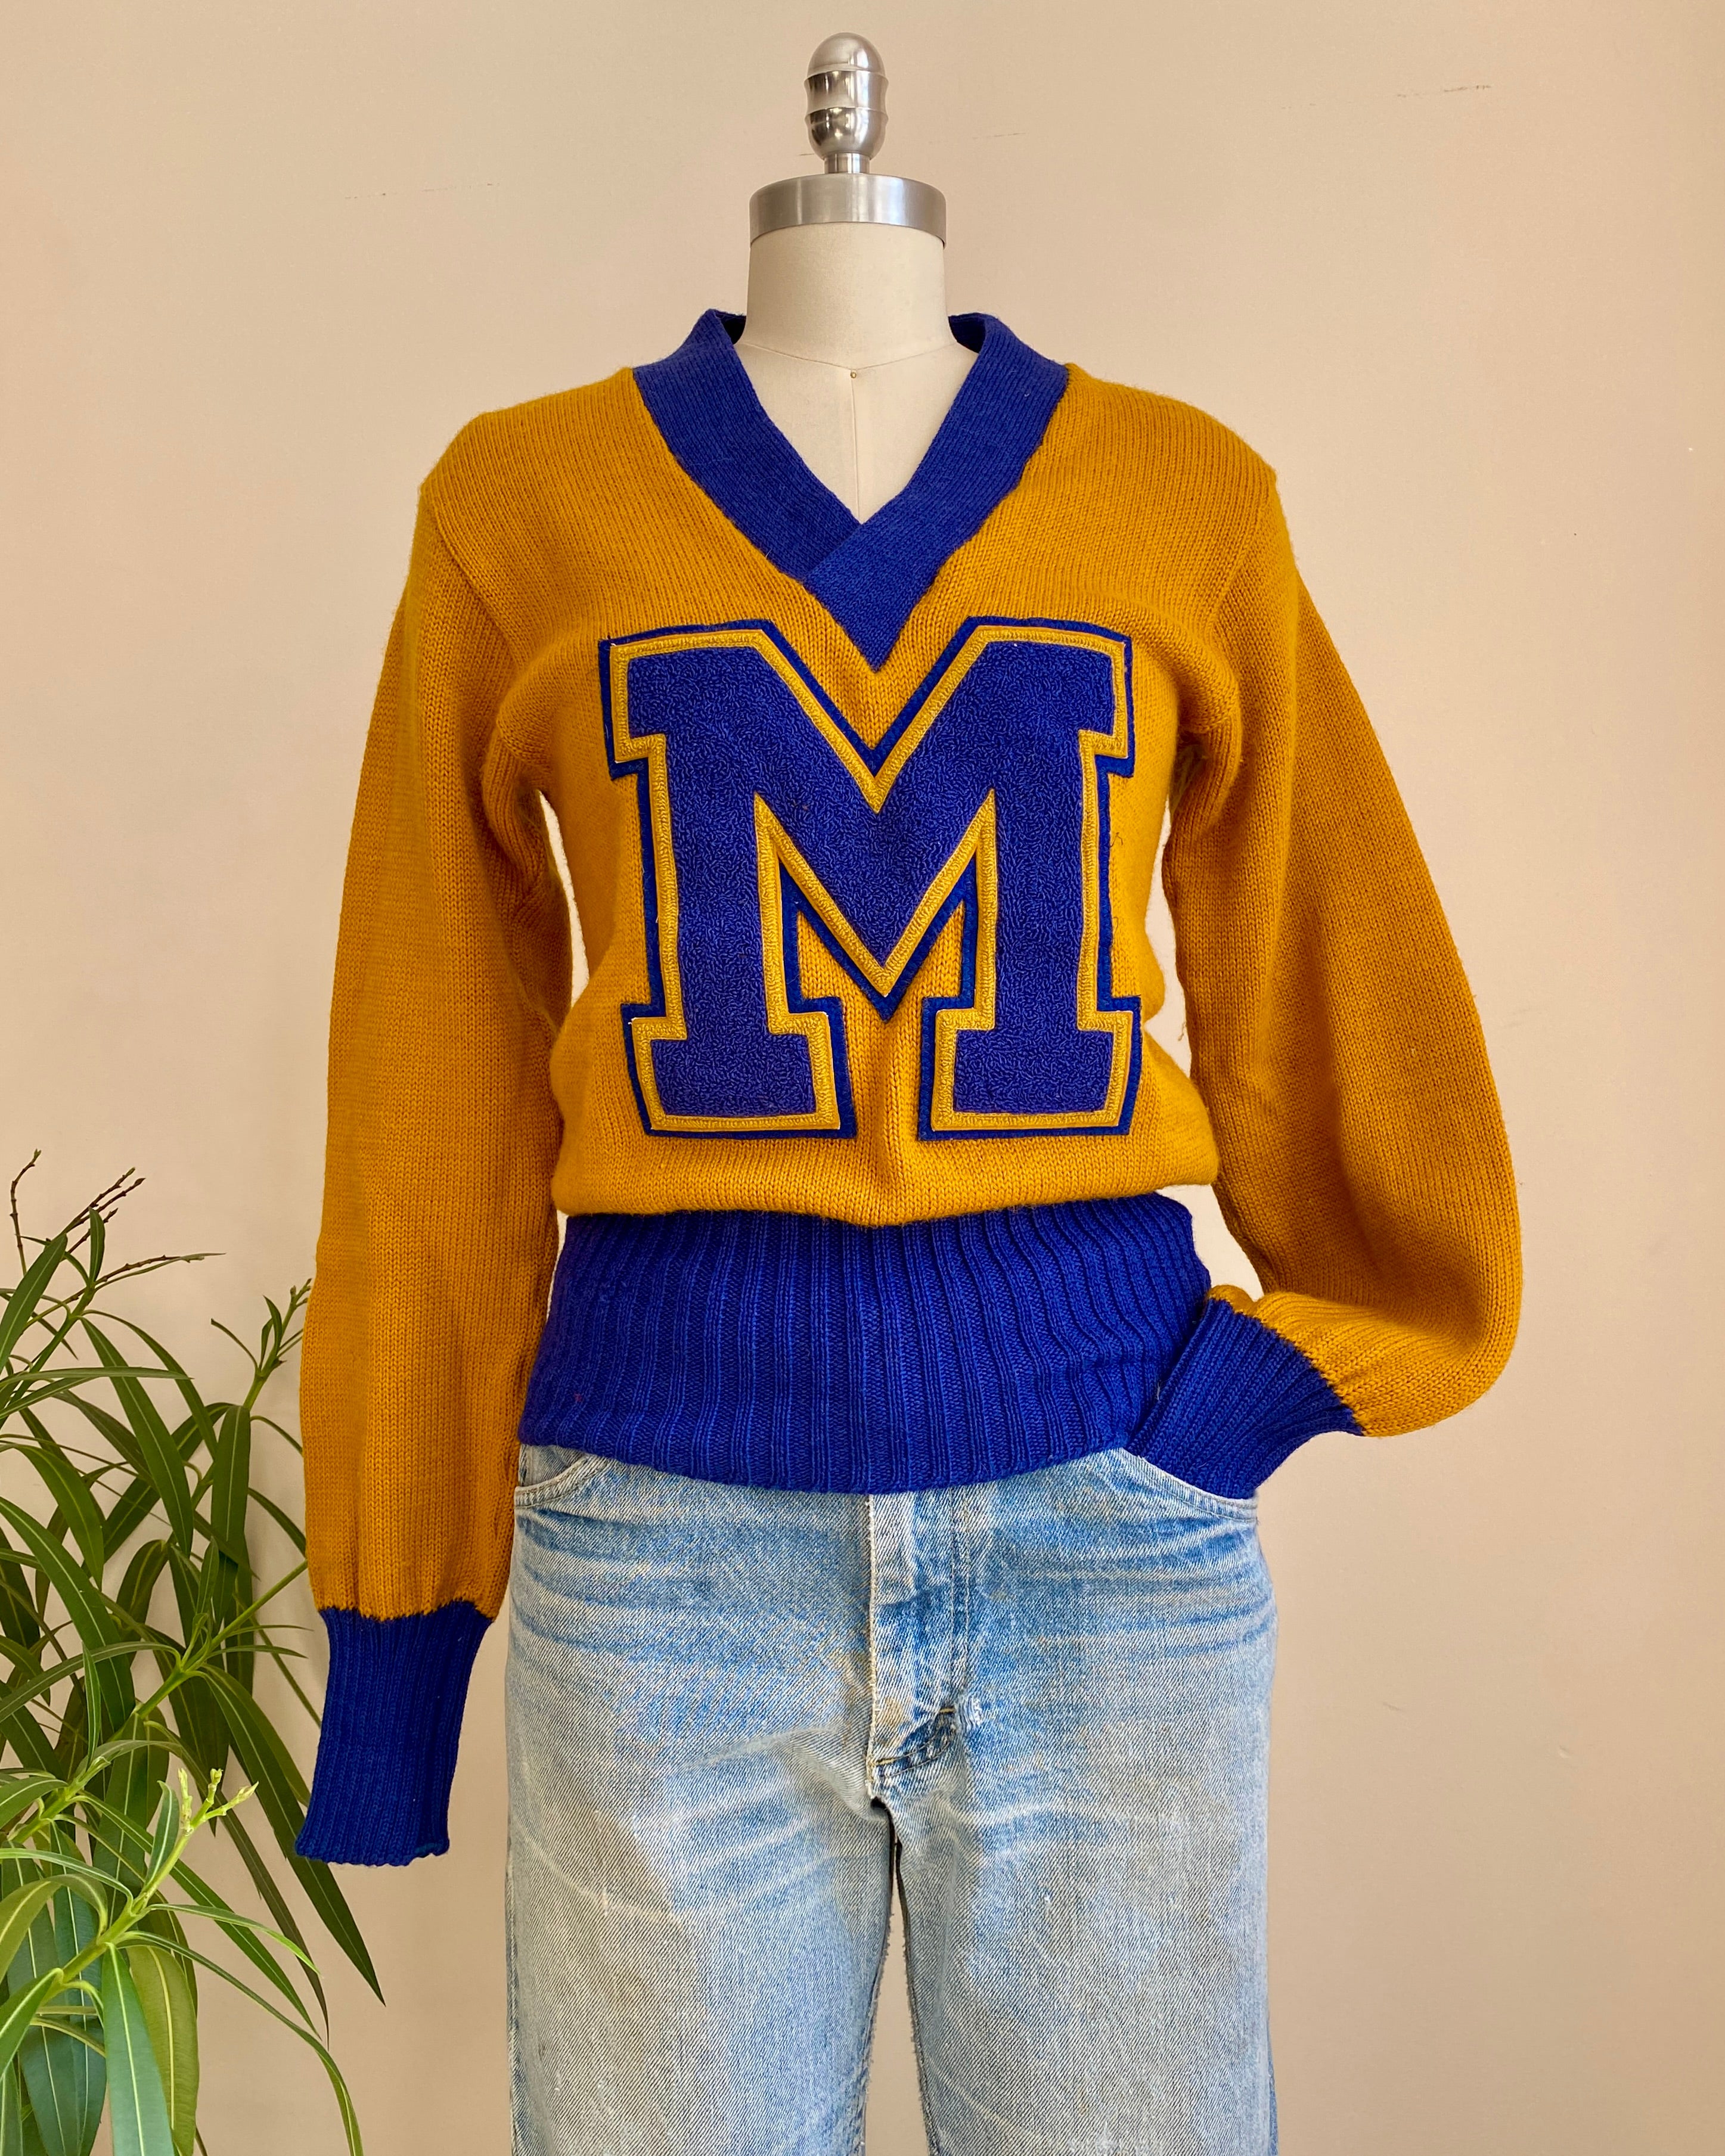 Vintage 1960s BUREAN HOLLOWAY Yellow and Blue Wool Varsity College Cheerleading VNeck Sweater S M 36 Made in USA